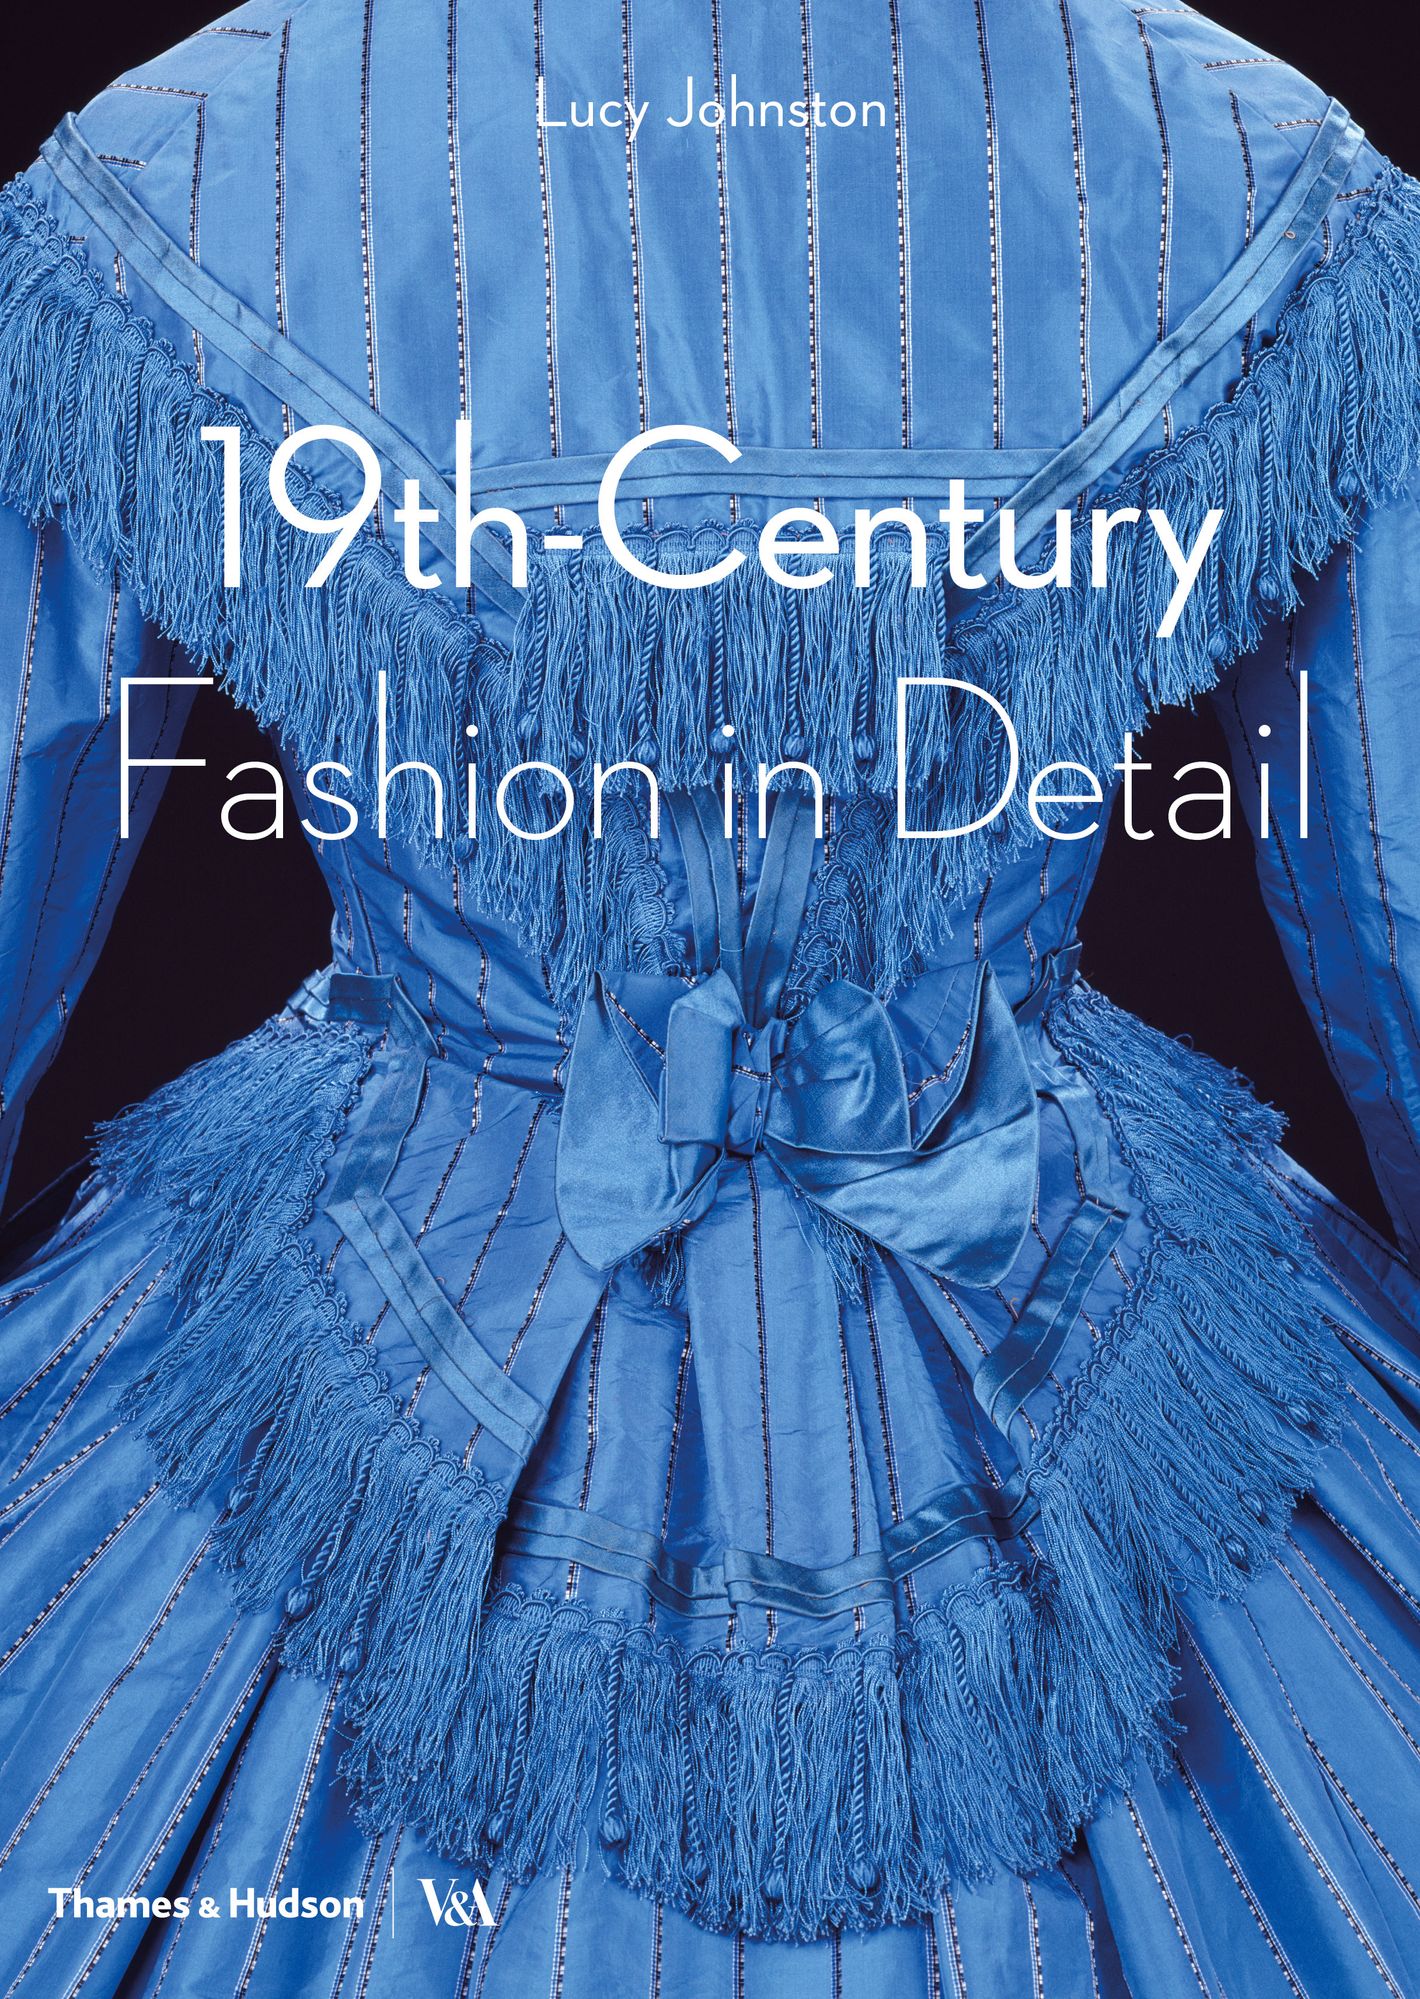 See Photos From the Book '19th-Century Fashion in Detail